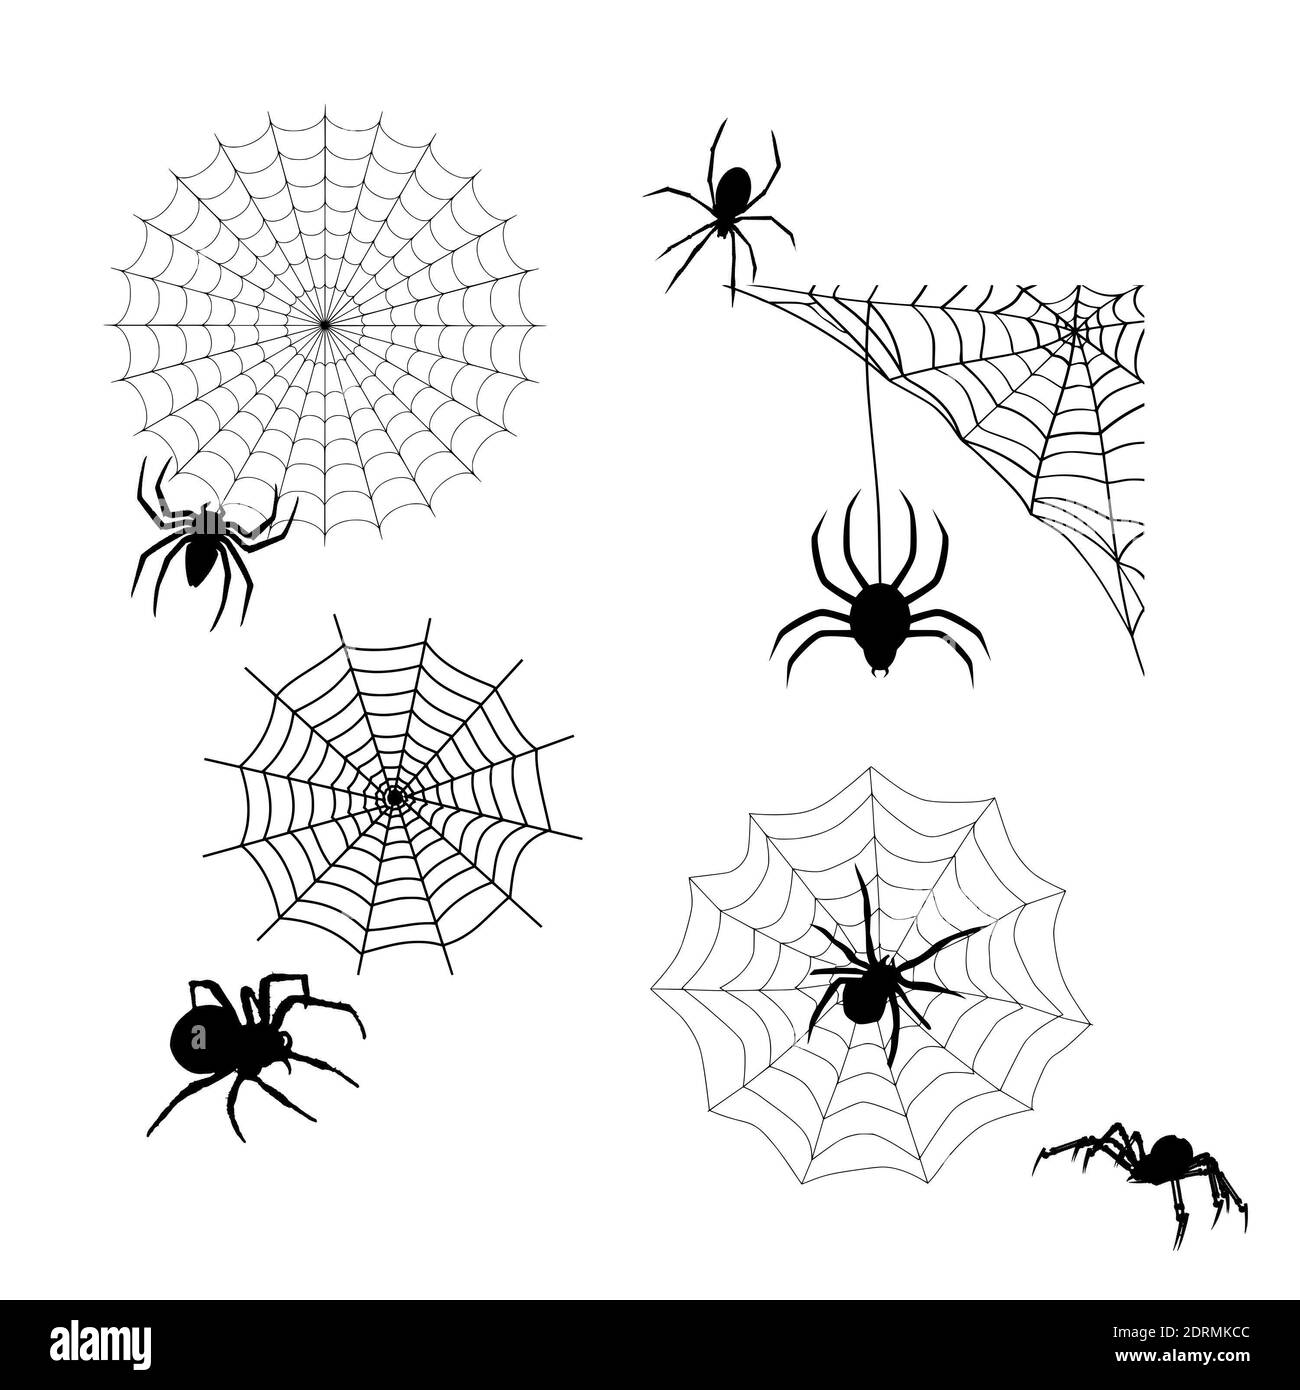 An illustration of cobwebs and spiders isolated on a white background - Halloween concept Stock Photo